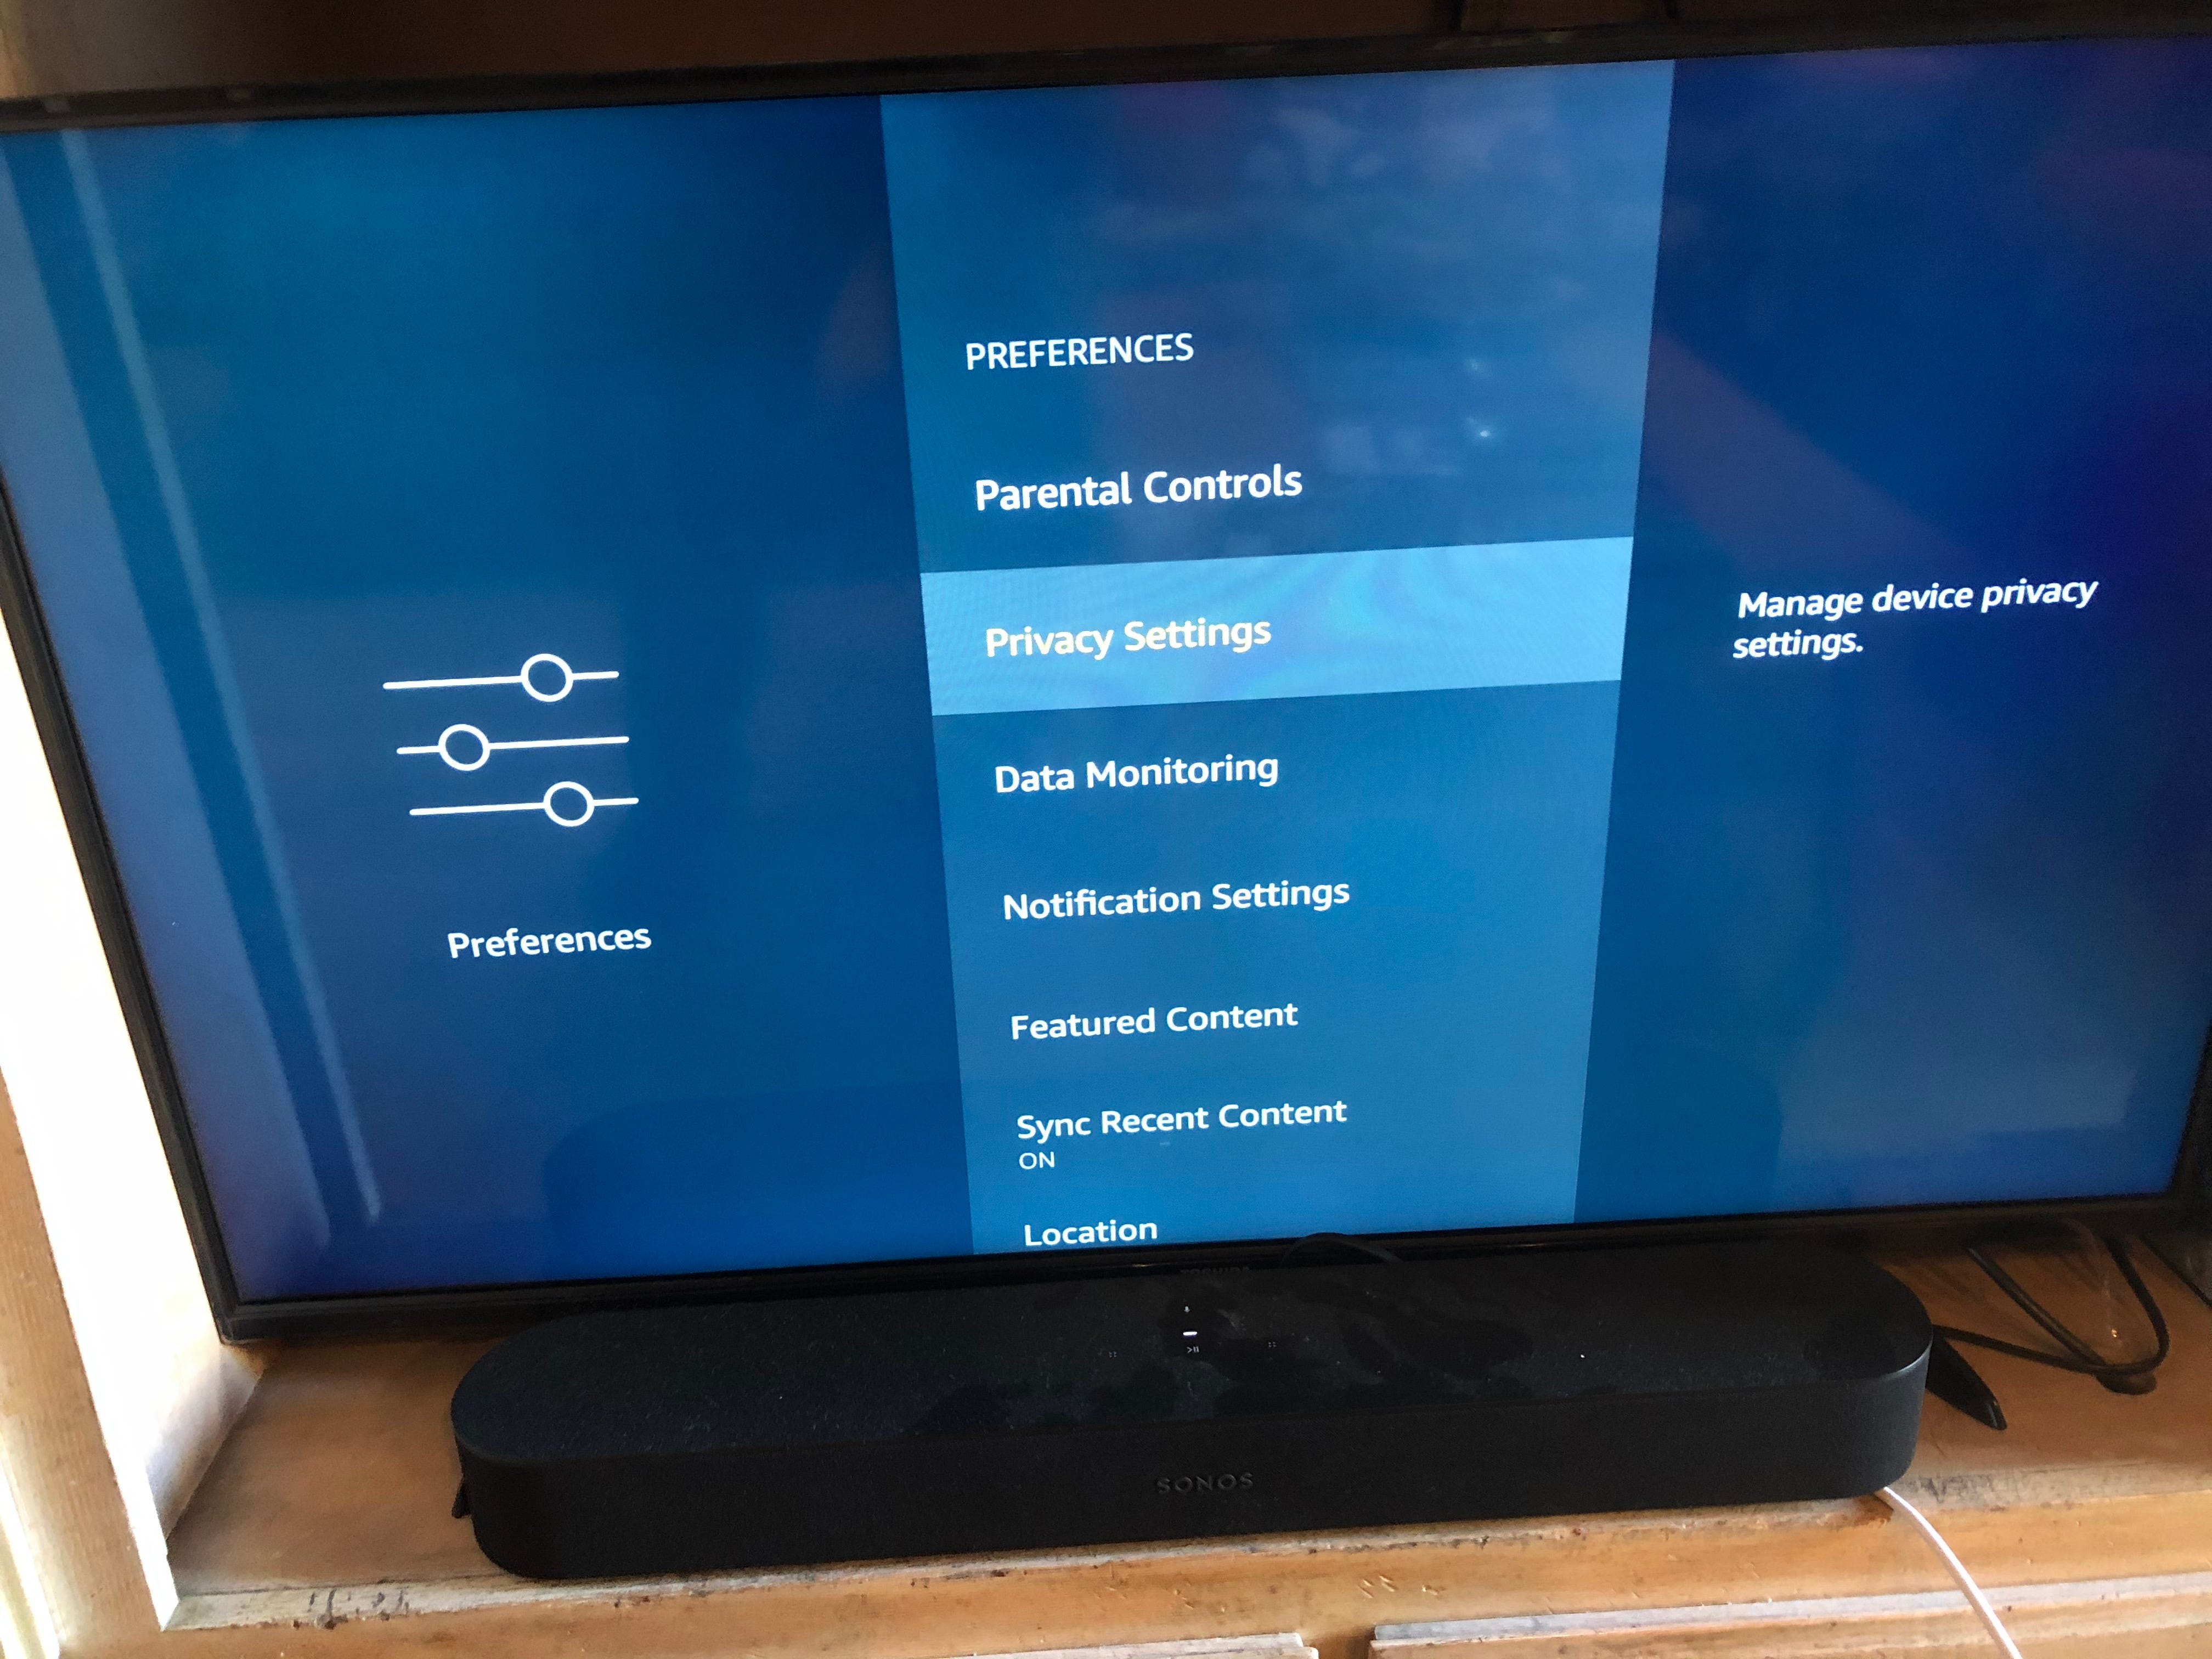 40 Top Photos Download Apps On Vizio Smart Tv / How To Download The Spectrum App On My Vizio Smart Tv 2021 Guide